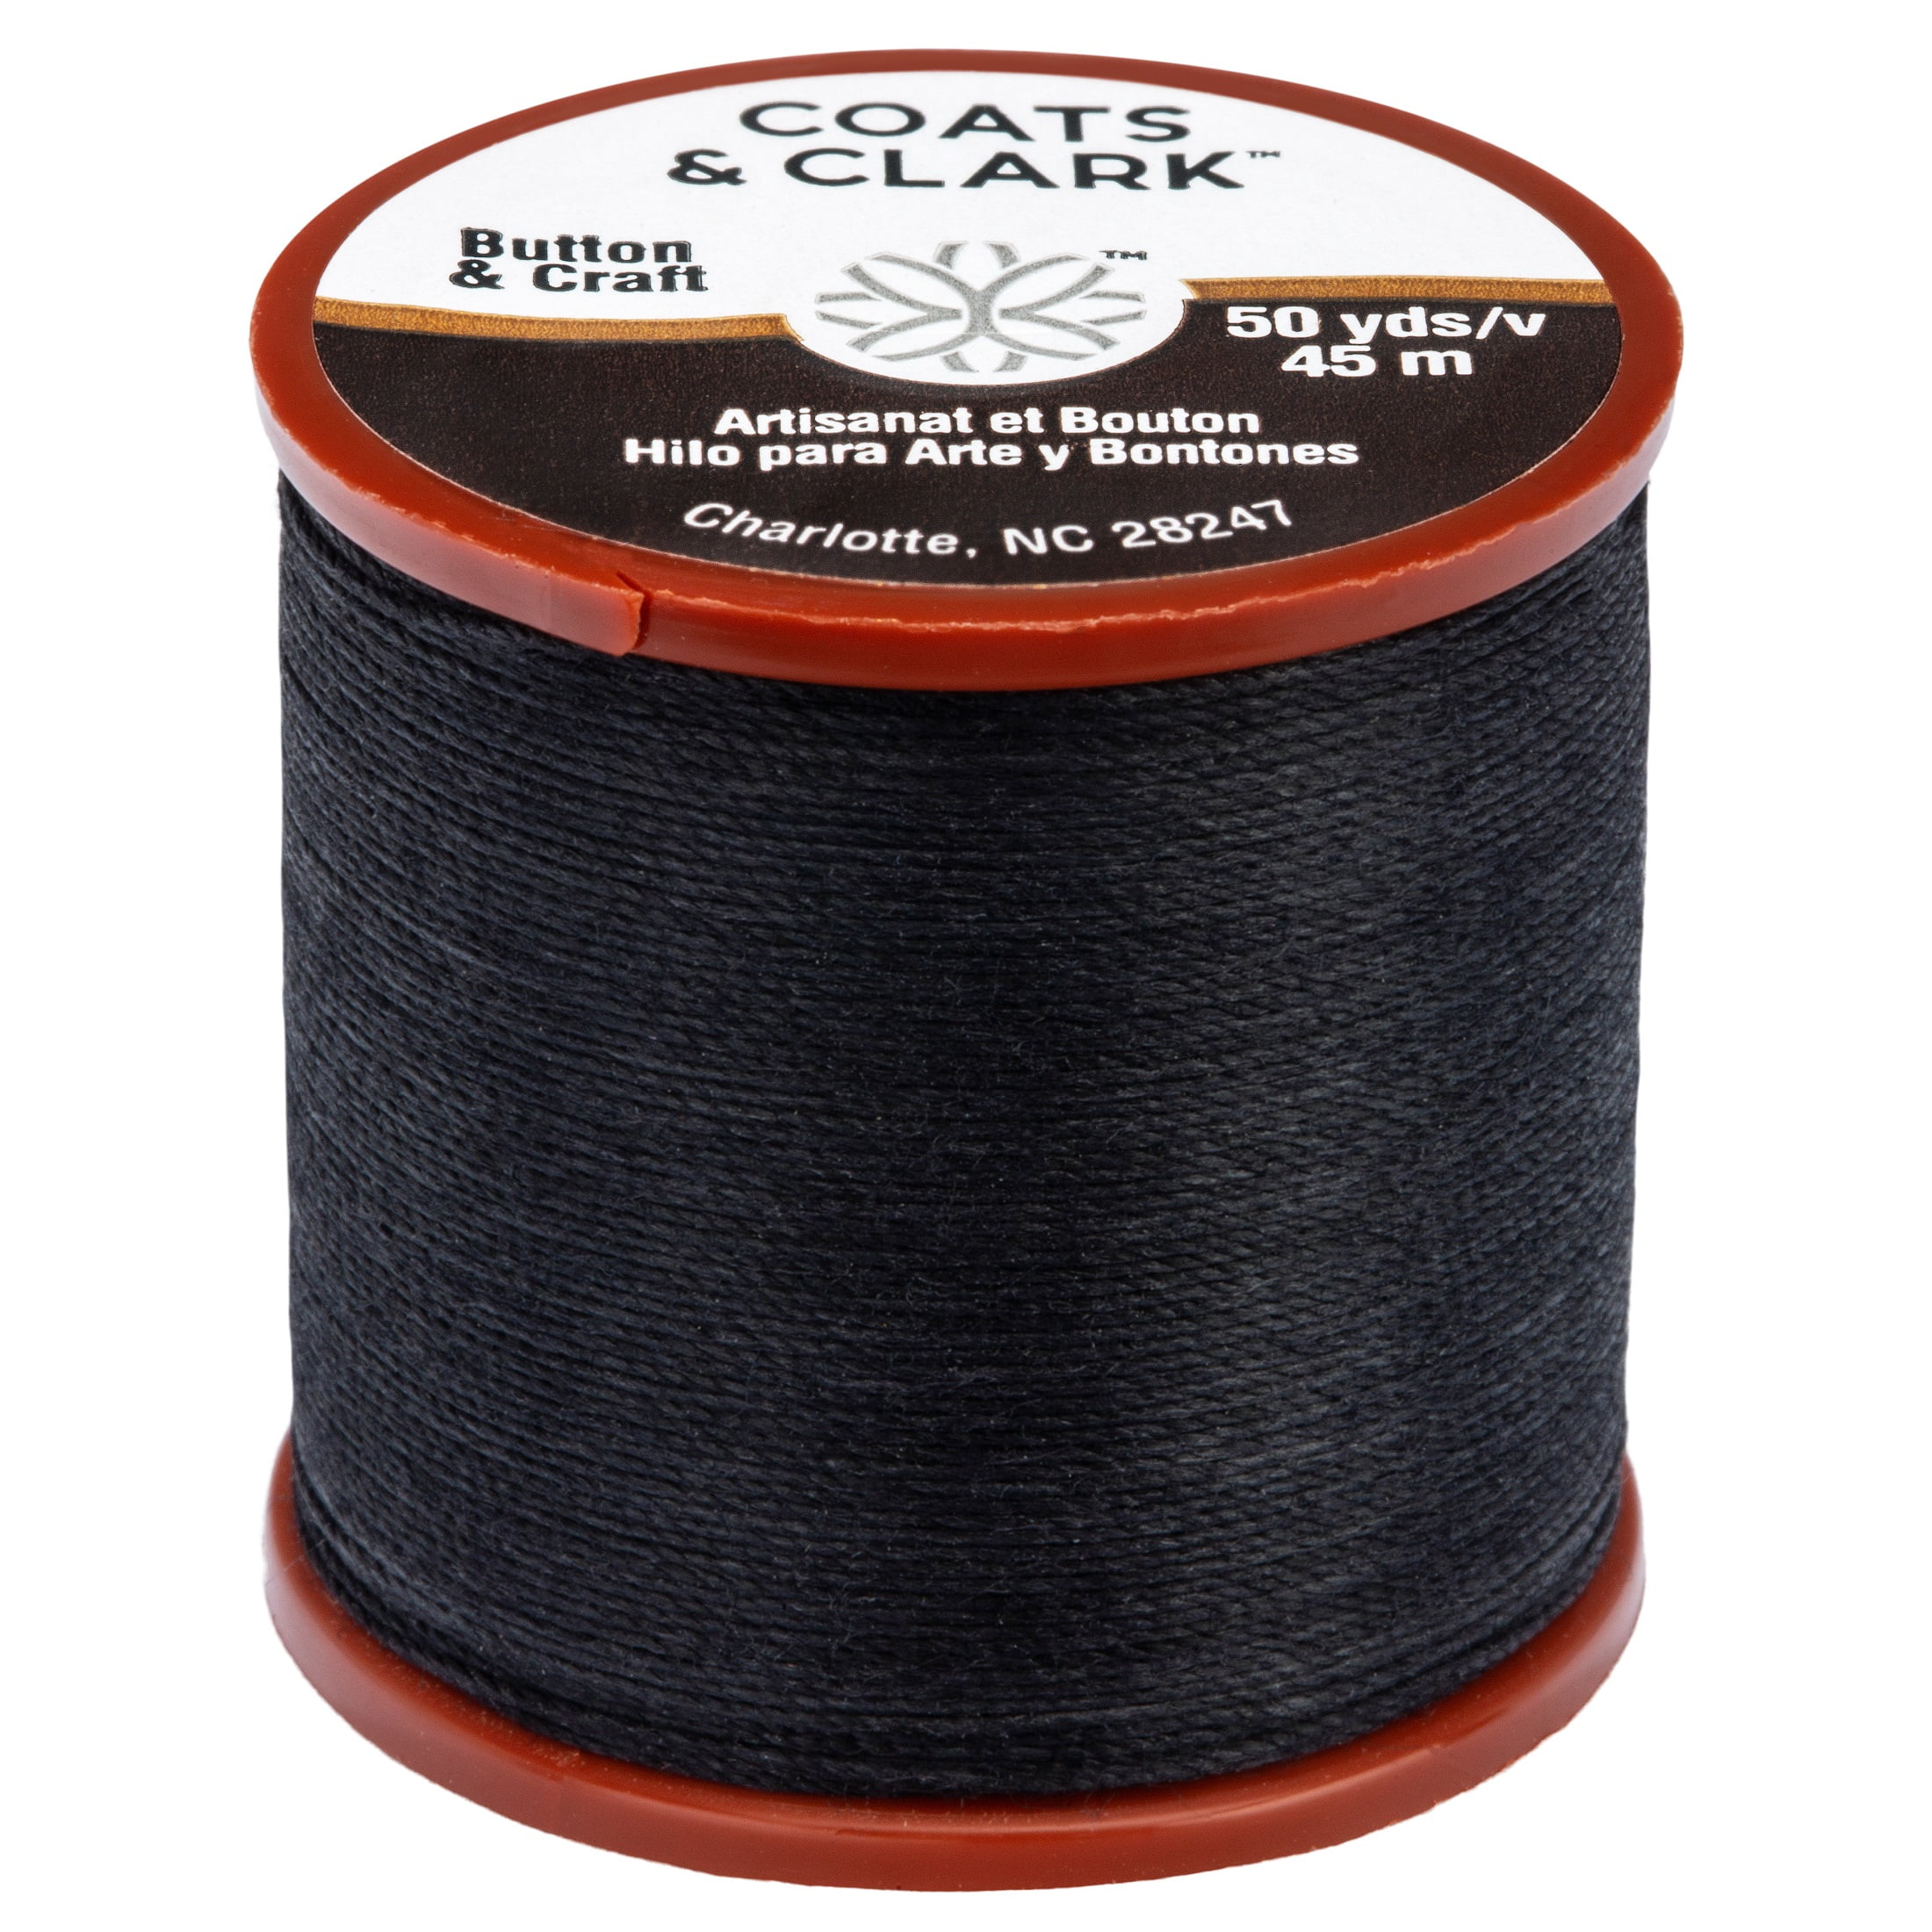 Coats & Clark Dual Duty Plus Button & Craft Thread, 50 yards/45 meters,  Yale Blue. 